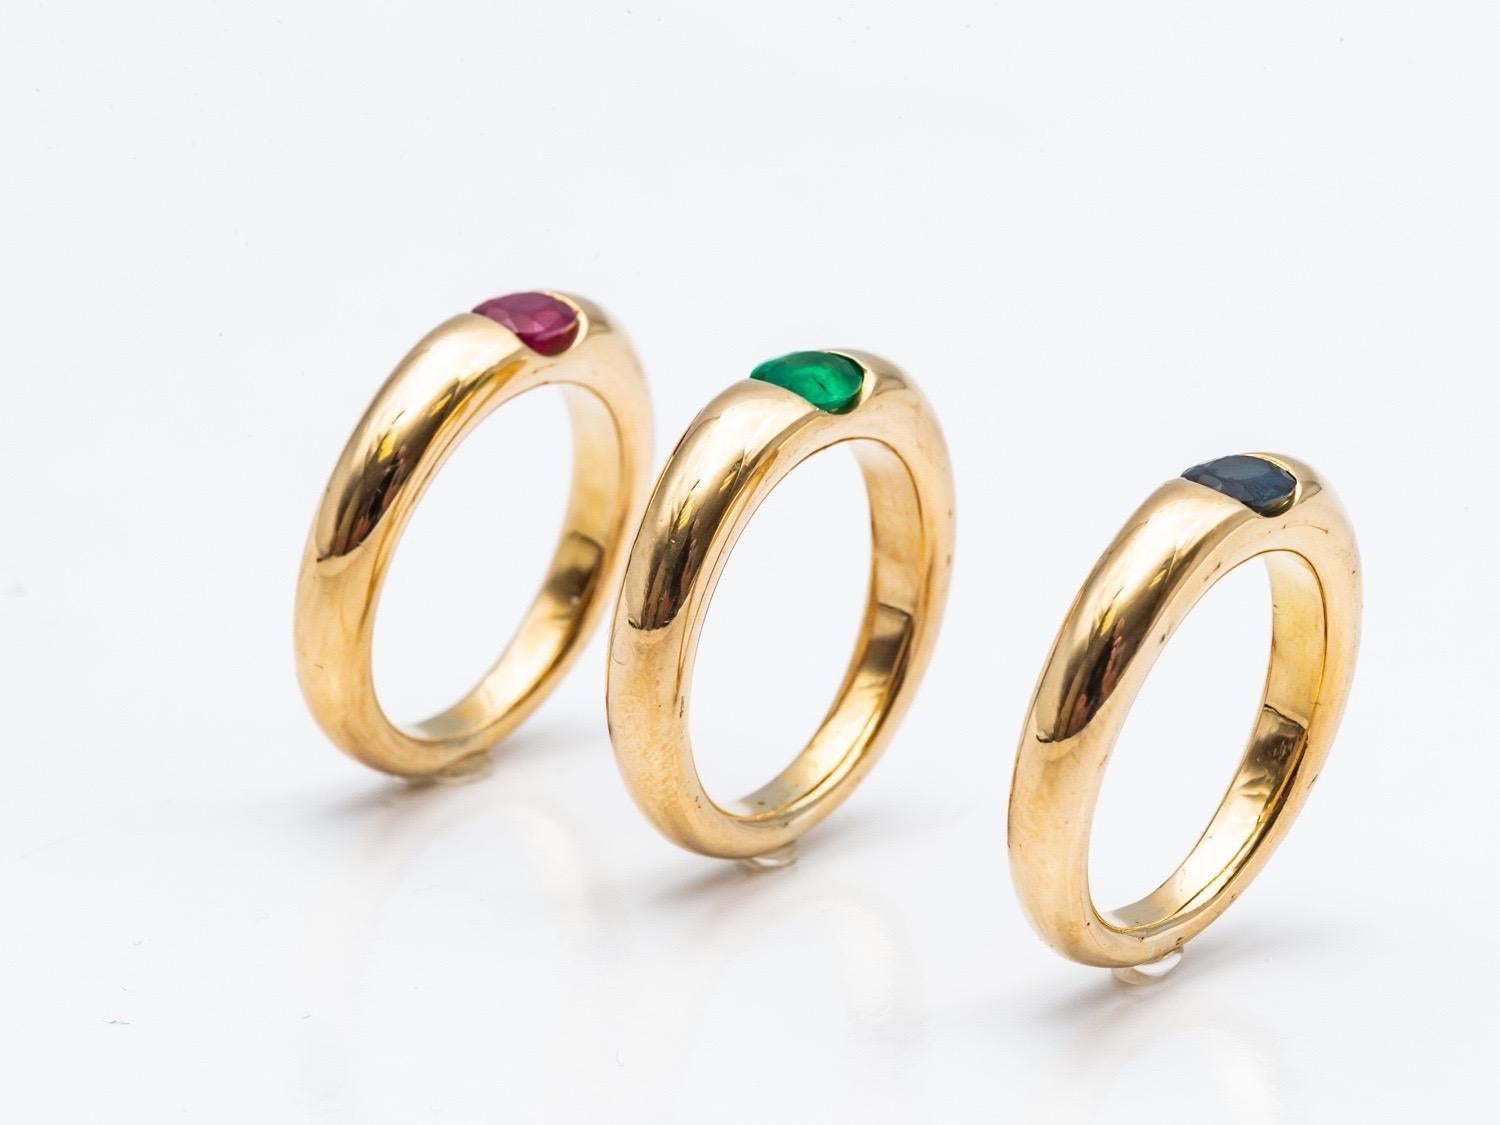 Three 18K Yellow Gold Bangles Rings Set with an Emerald, a Sapphire, and a Ruby

Ring composed of three Cartier house-style bangles in 18-carat yellow gold. Each ring is separable and is set with a stone.

Emerald bangle 9.8g
Sapphire bangle